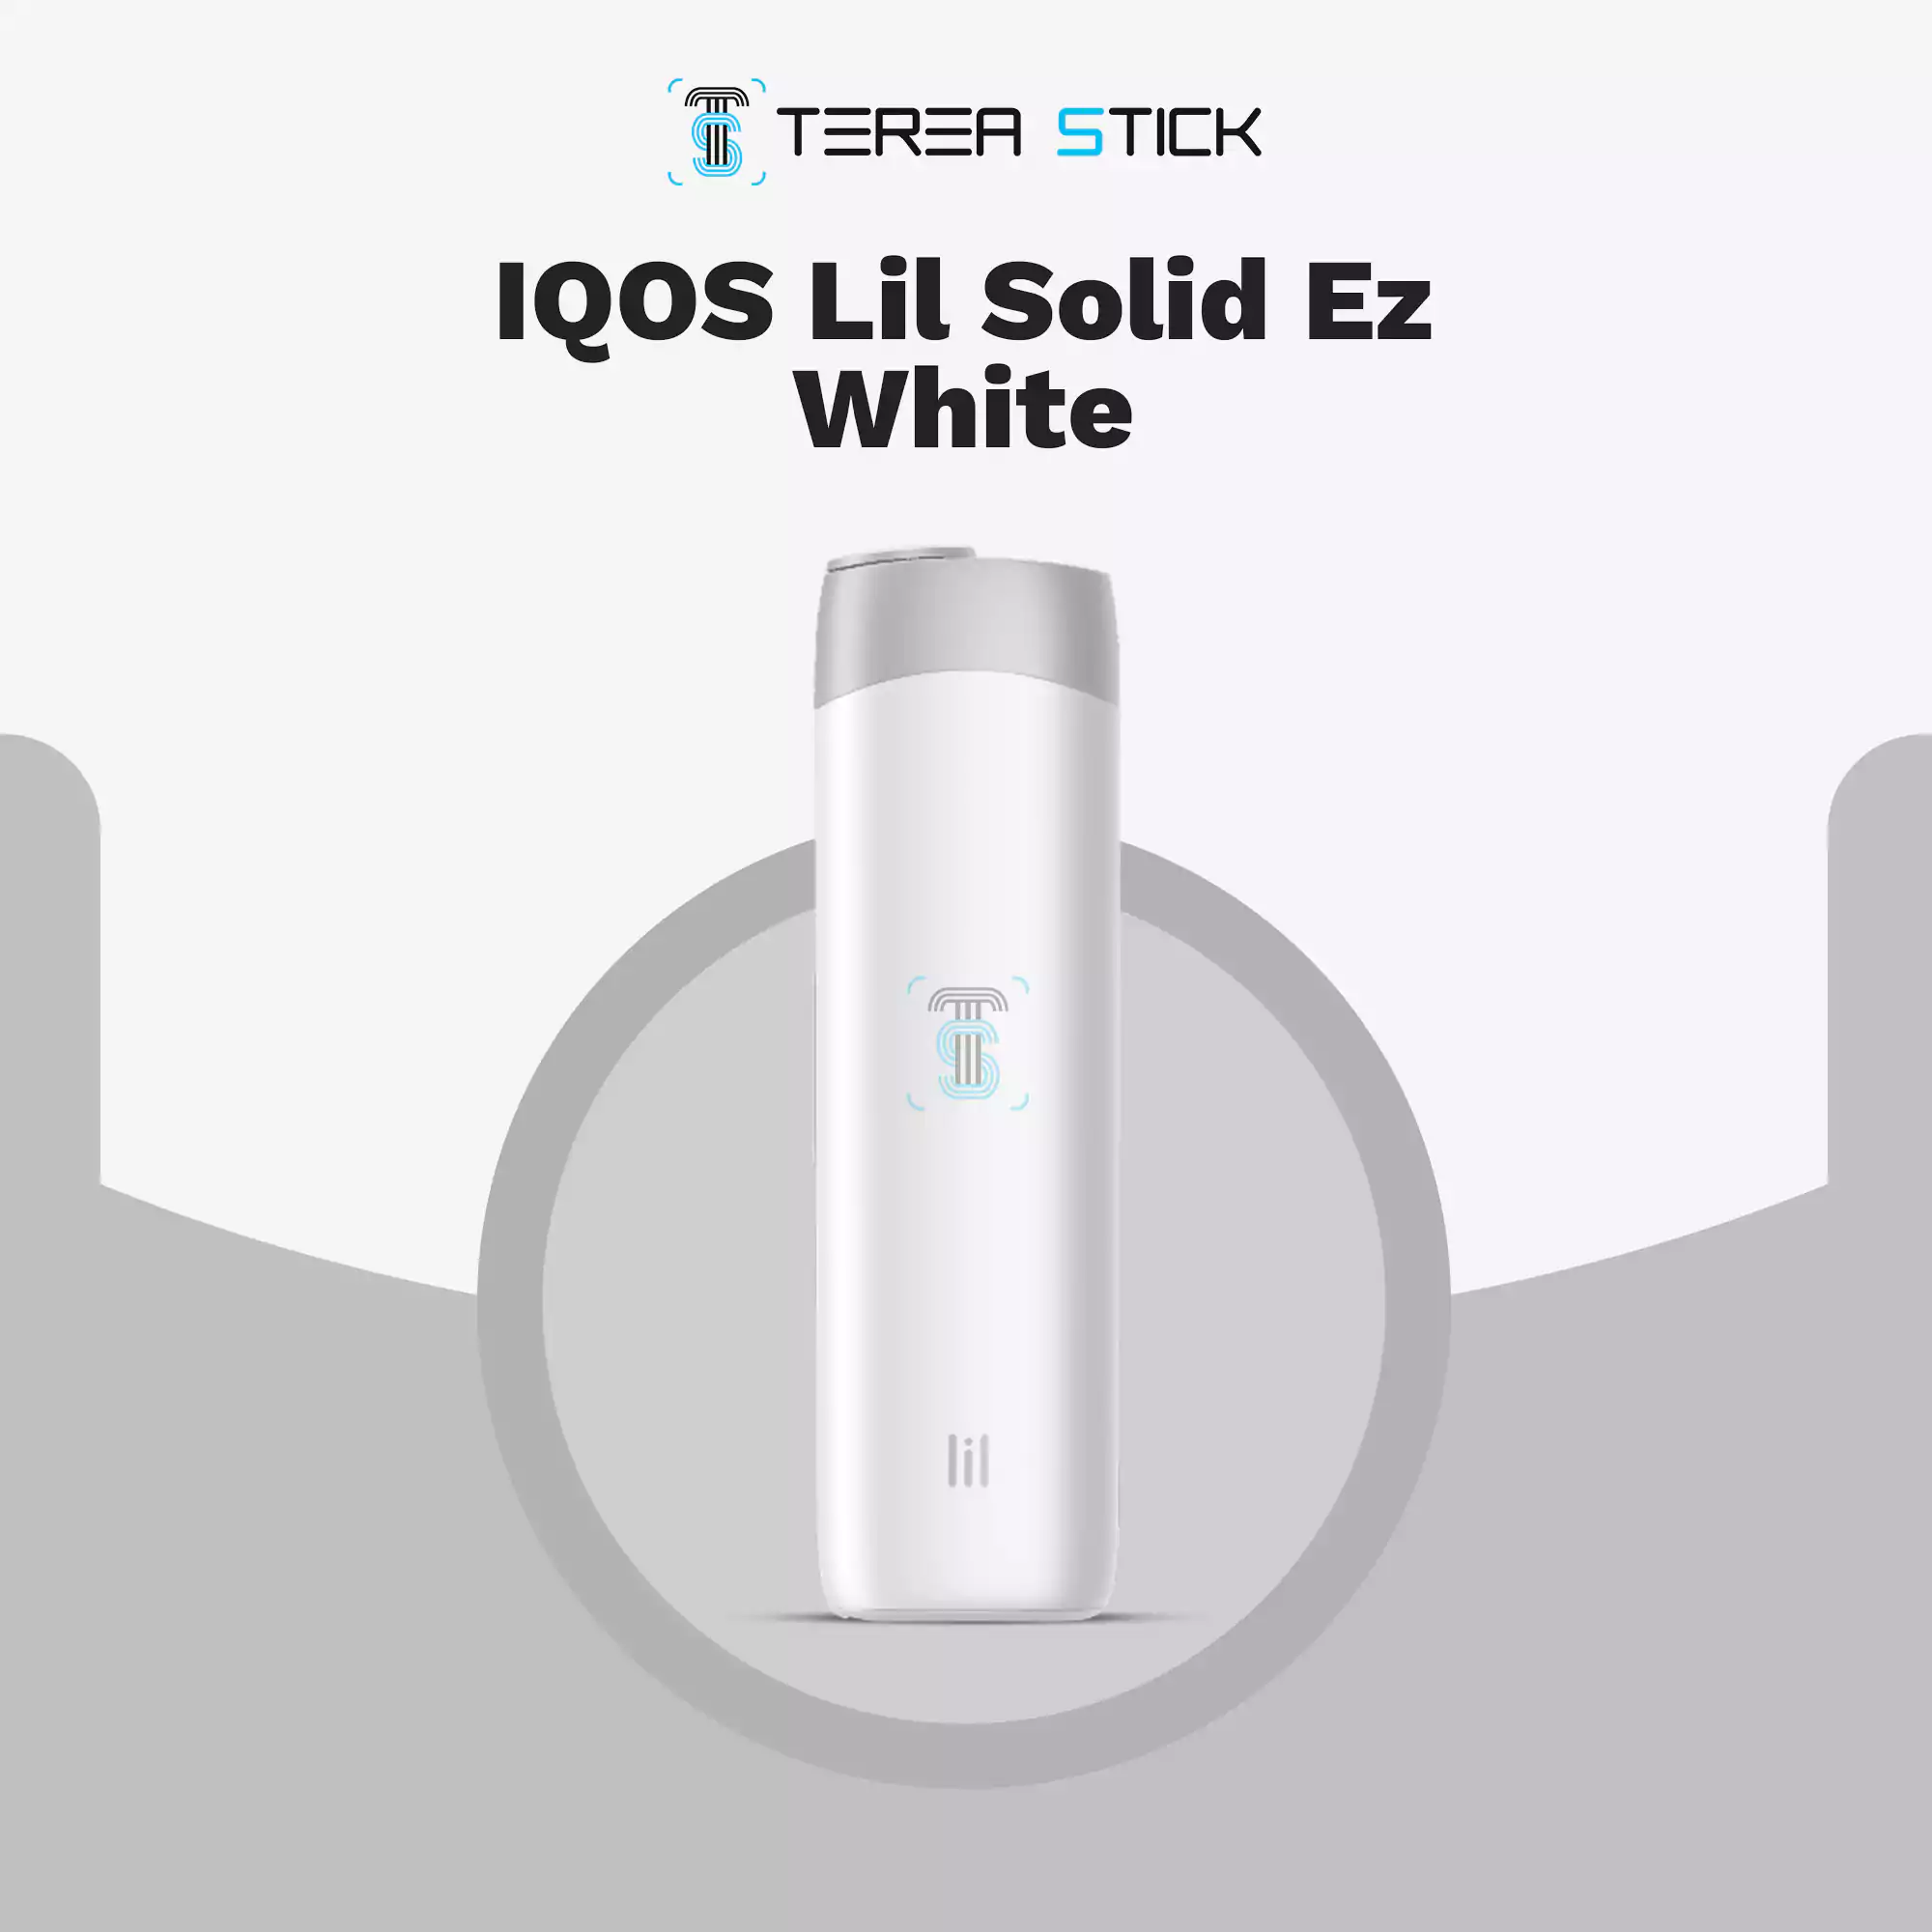 IQOS 3 Duo vs. IQOS Lil Solid: A Complete Review